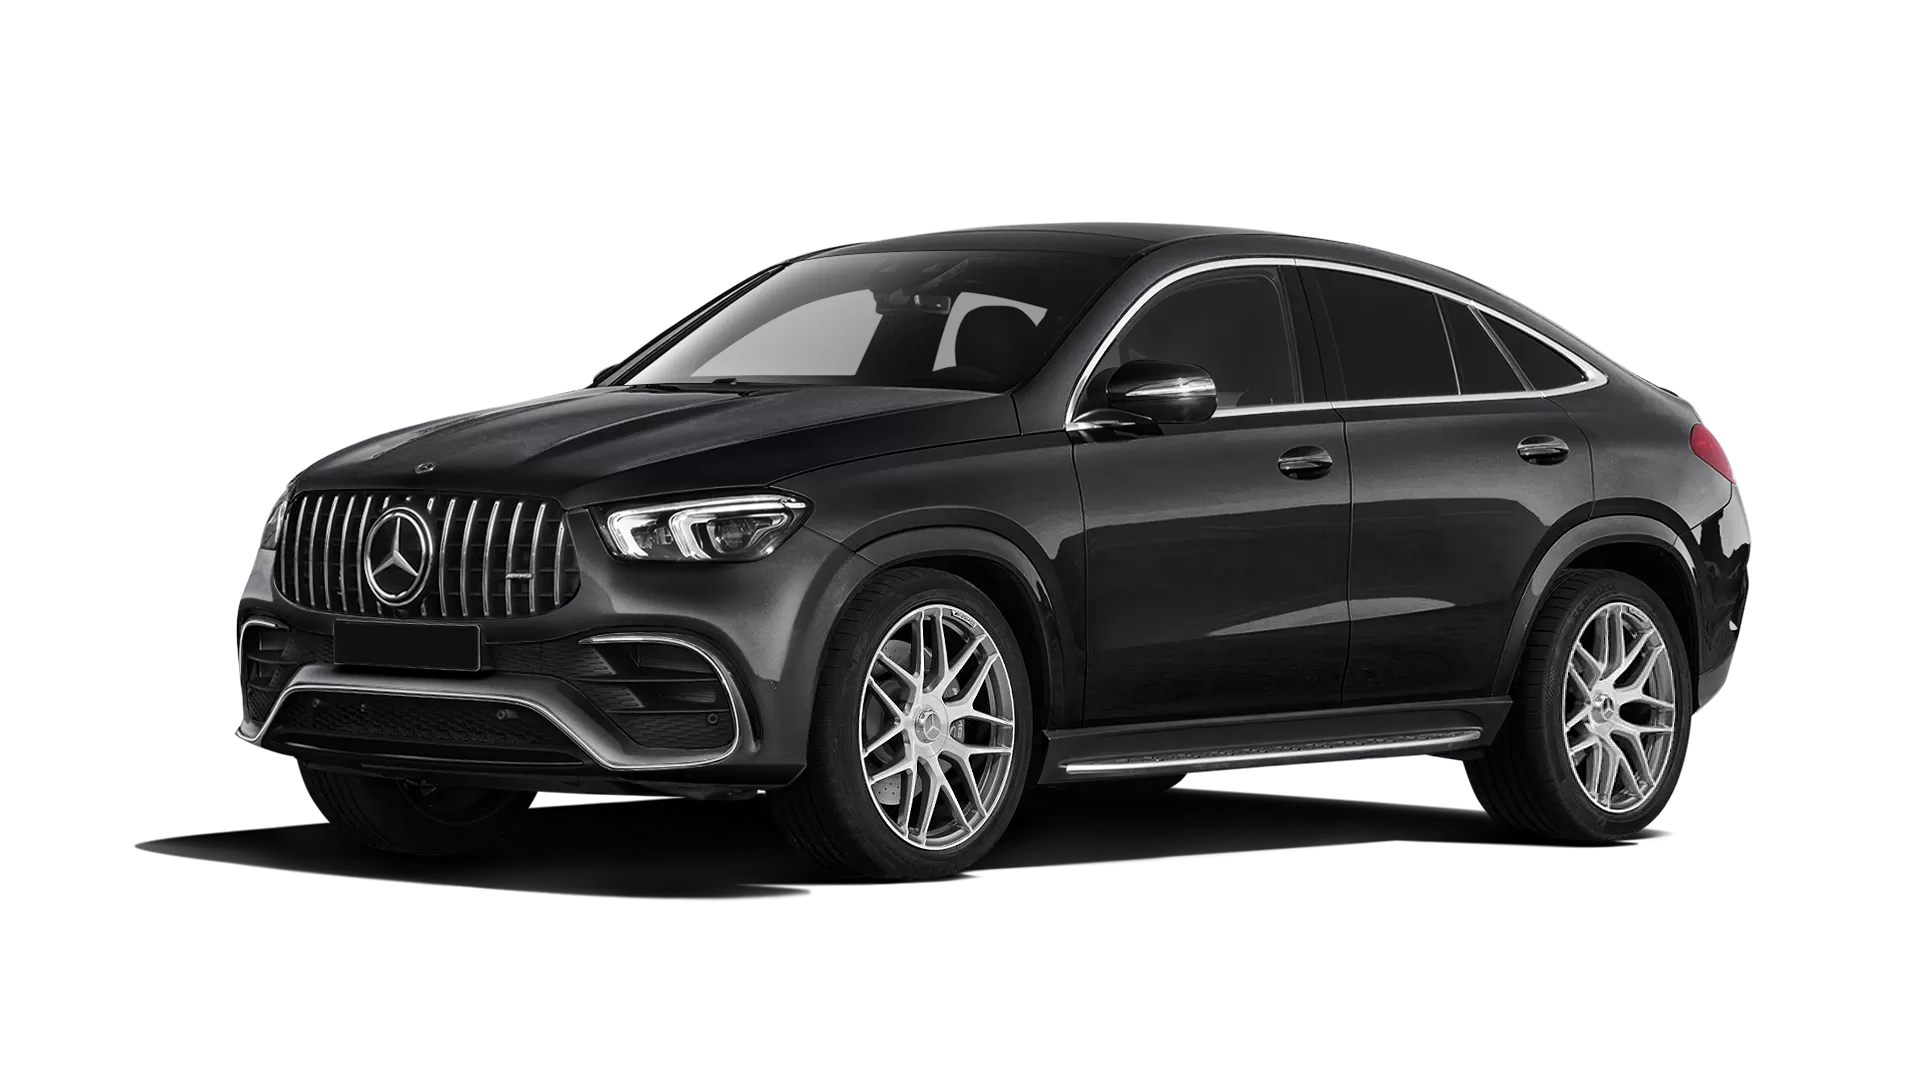 Mercedes GLE Coupe AMG 63 C167 stock front view in Obsidian Black color